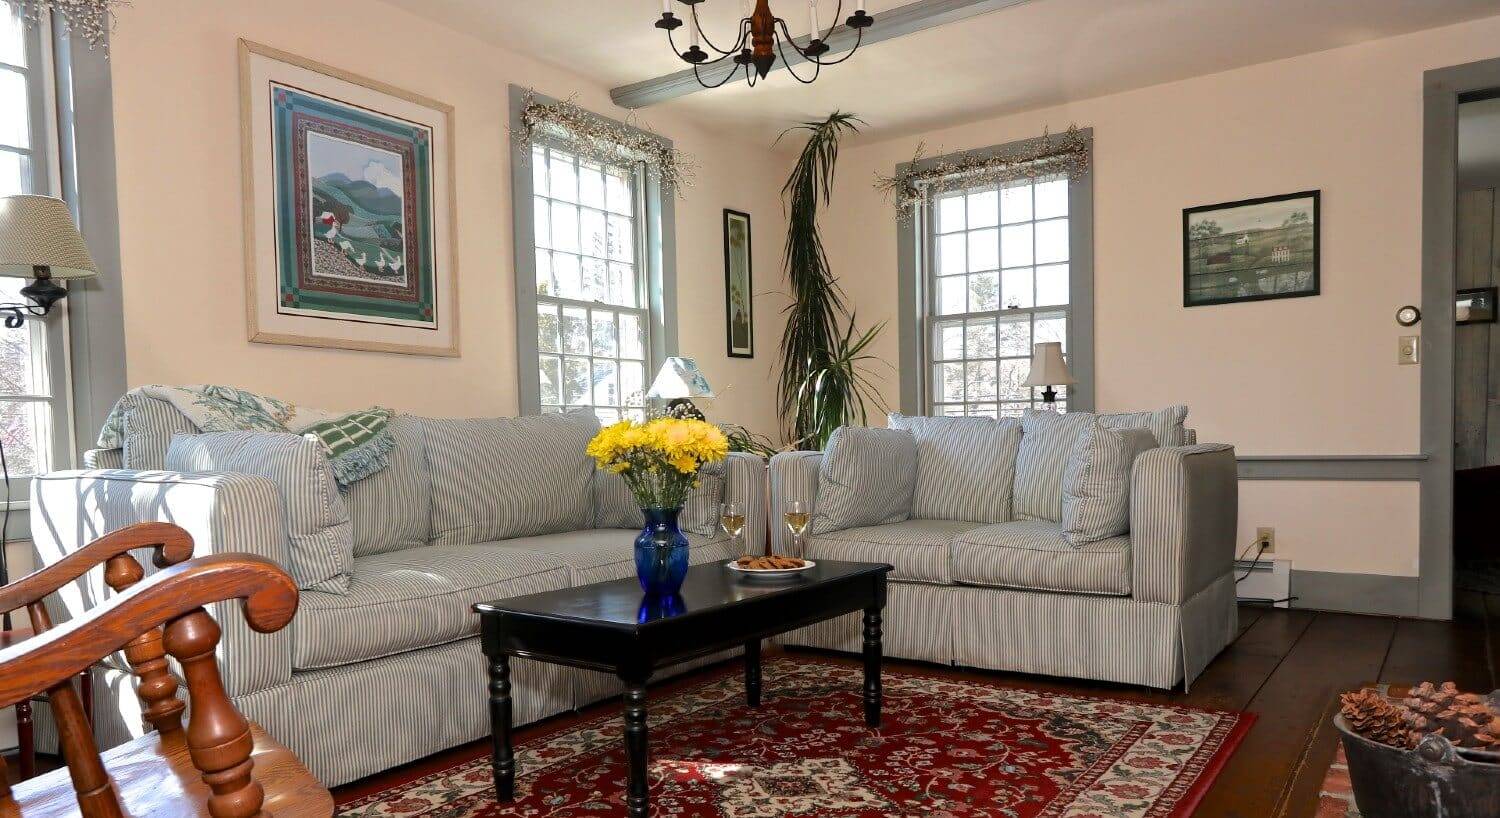 Living room with plush striped couch and love seat, coffee table, and bright windows